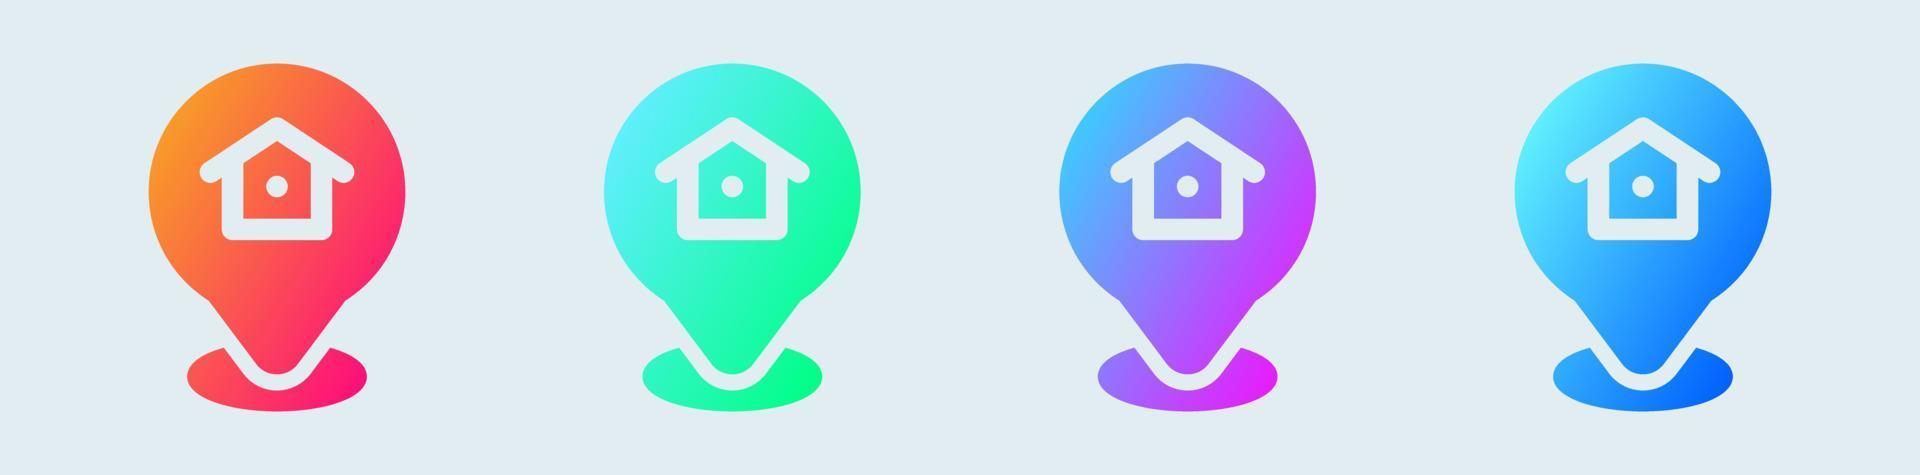 Address solid icon in gradient colors. Location signs vector illustration.